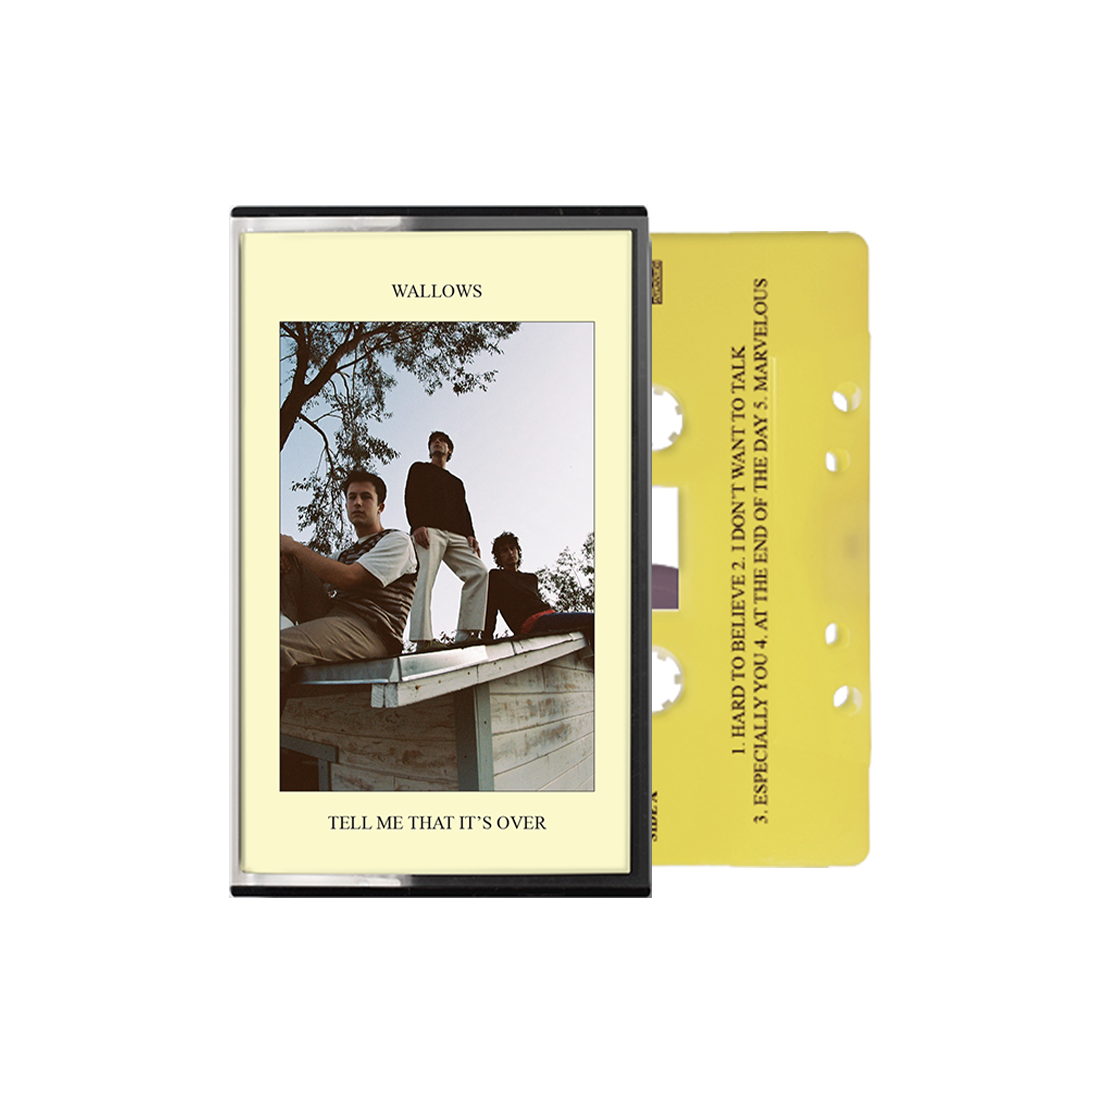 'TELL ME THAT IT'S OVER' (LIMITED YELLOW CASSETTE)